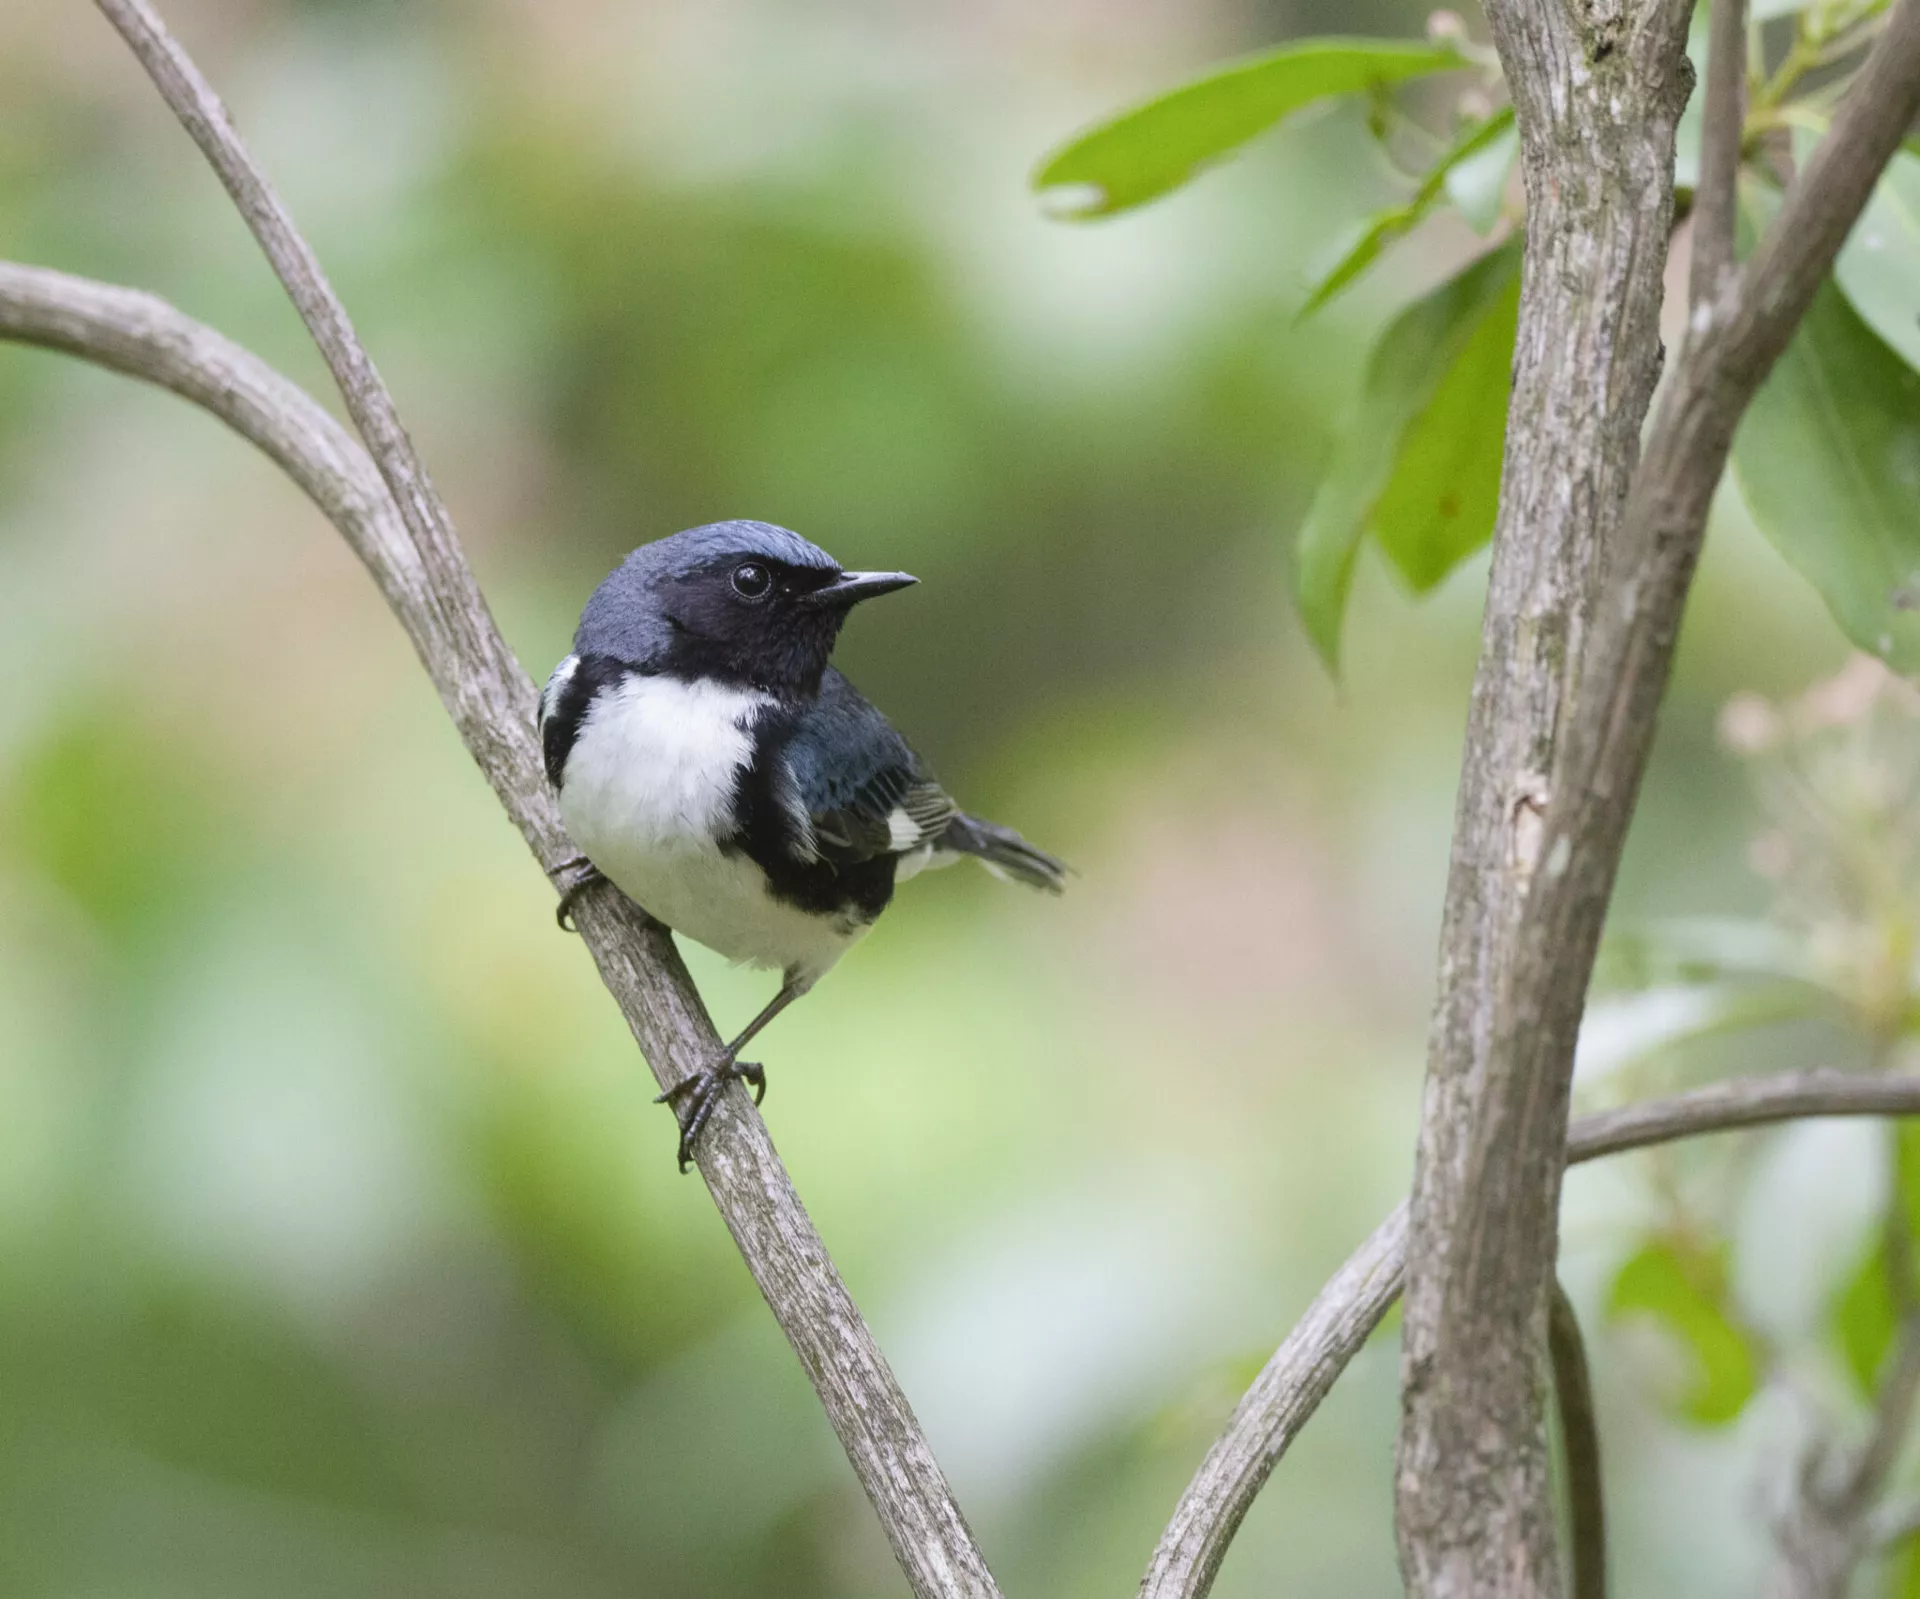 A Black-throated Blue Warbler sitting on a small branch in Western PA's Cook Forest. The Warbler is looking to its left, showcasing a large spot of white plumage on its chest, surrounded by various black and blue feathers.